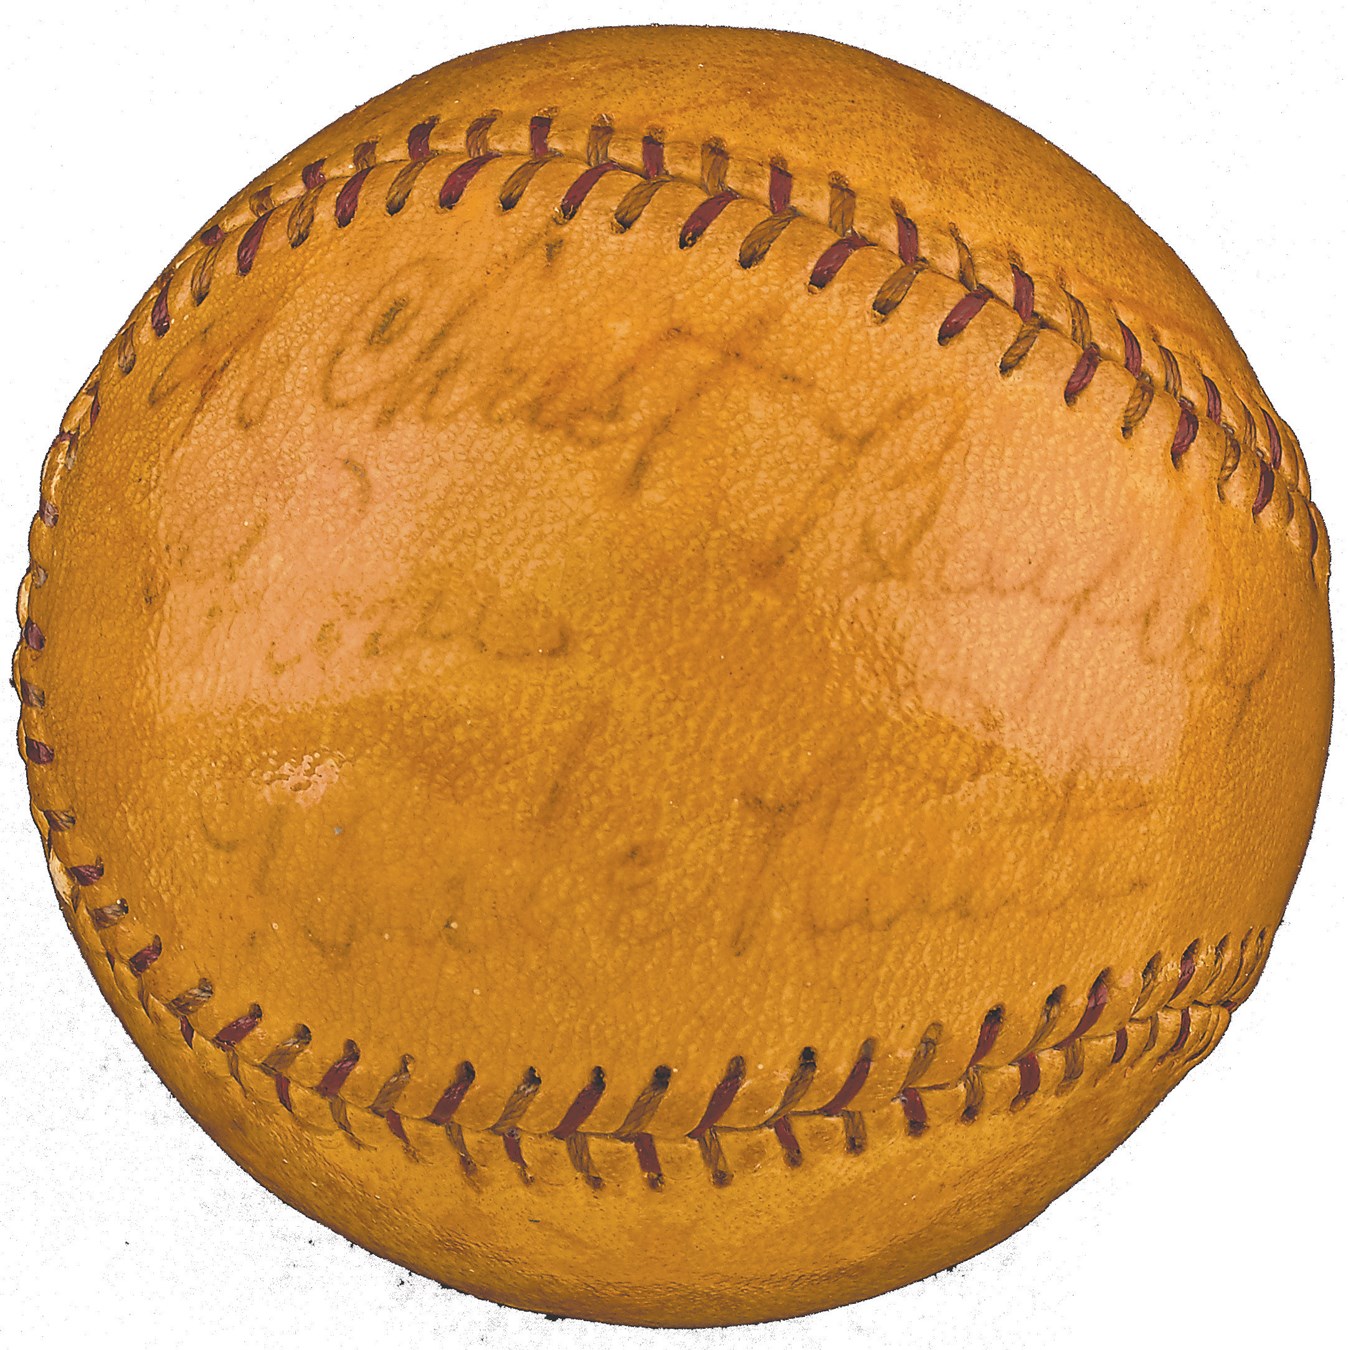 Babe Ruth Signed Inscribed "To Christ" Baseball (JSA)